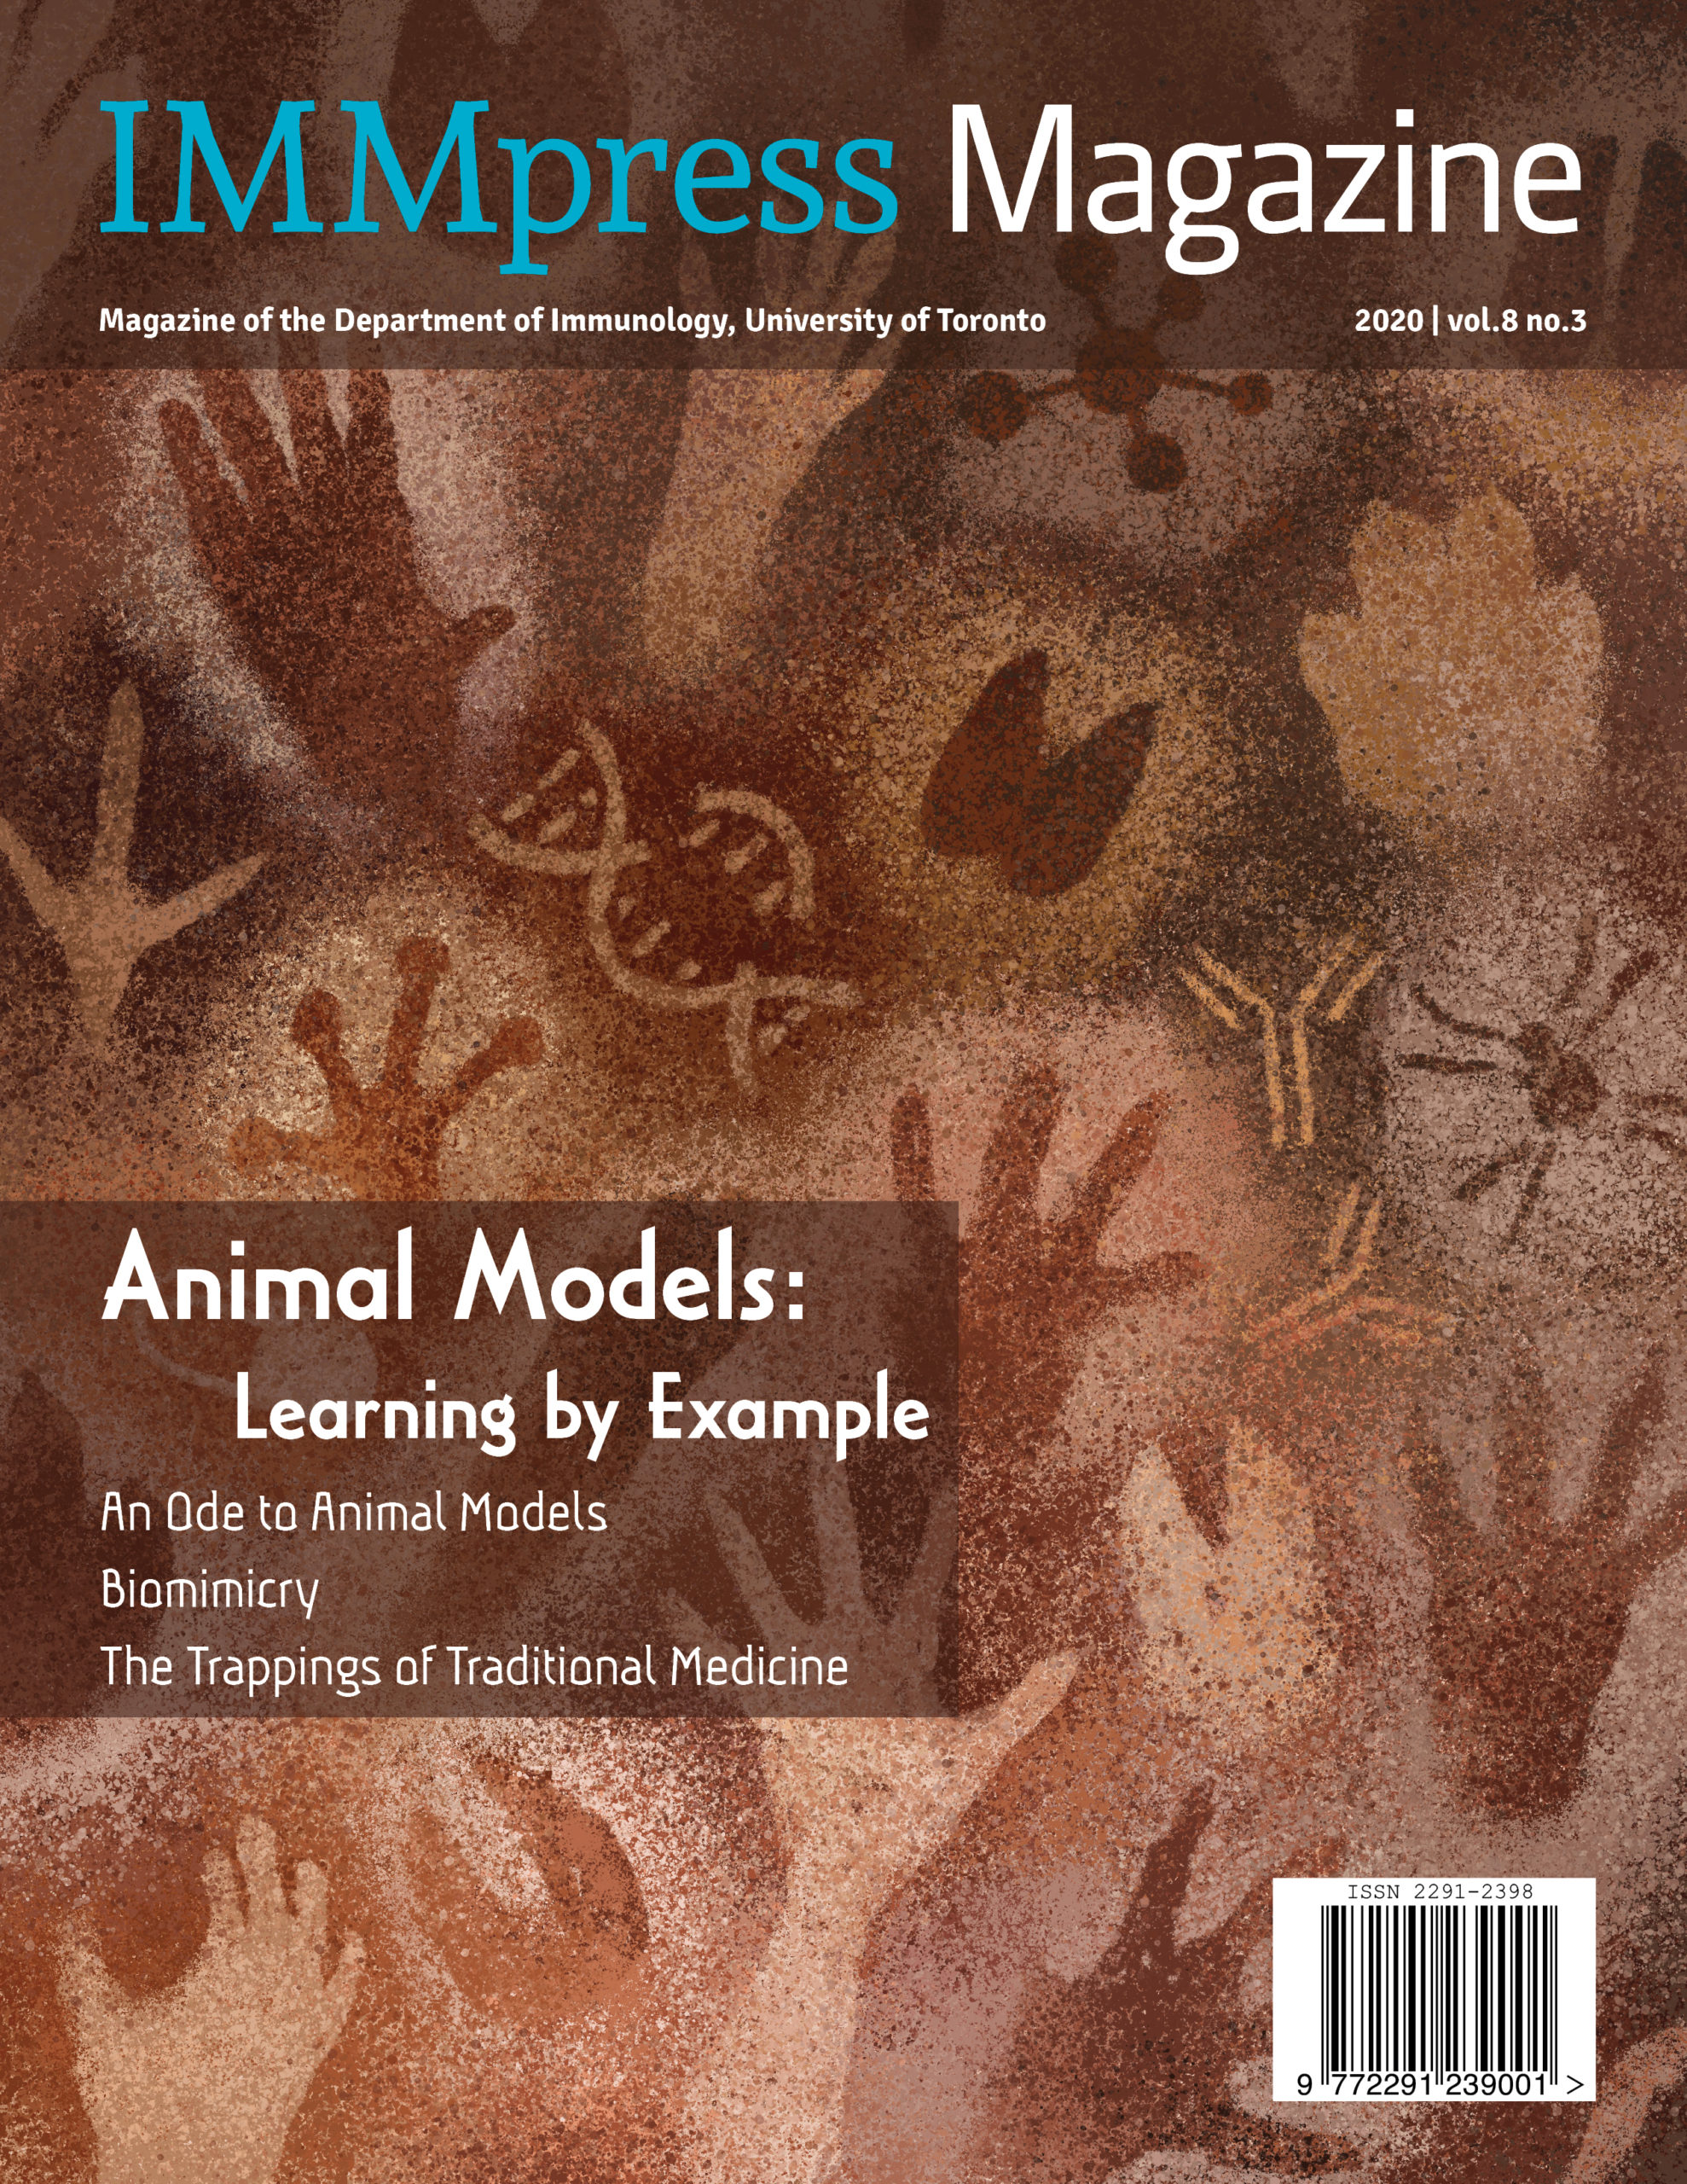 Issue 3, 2020 – Cover